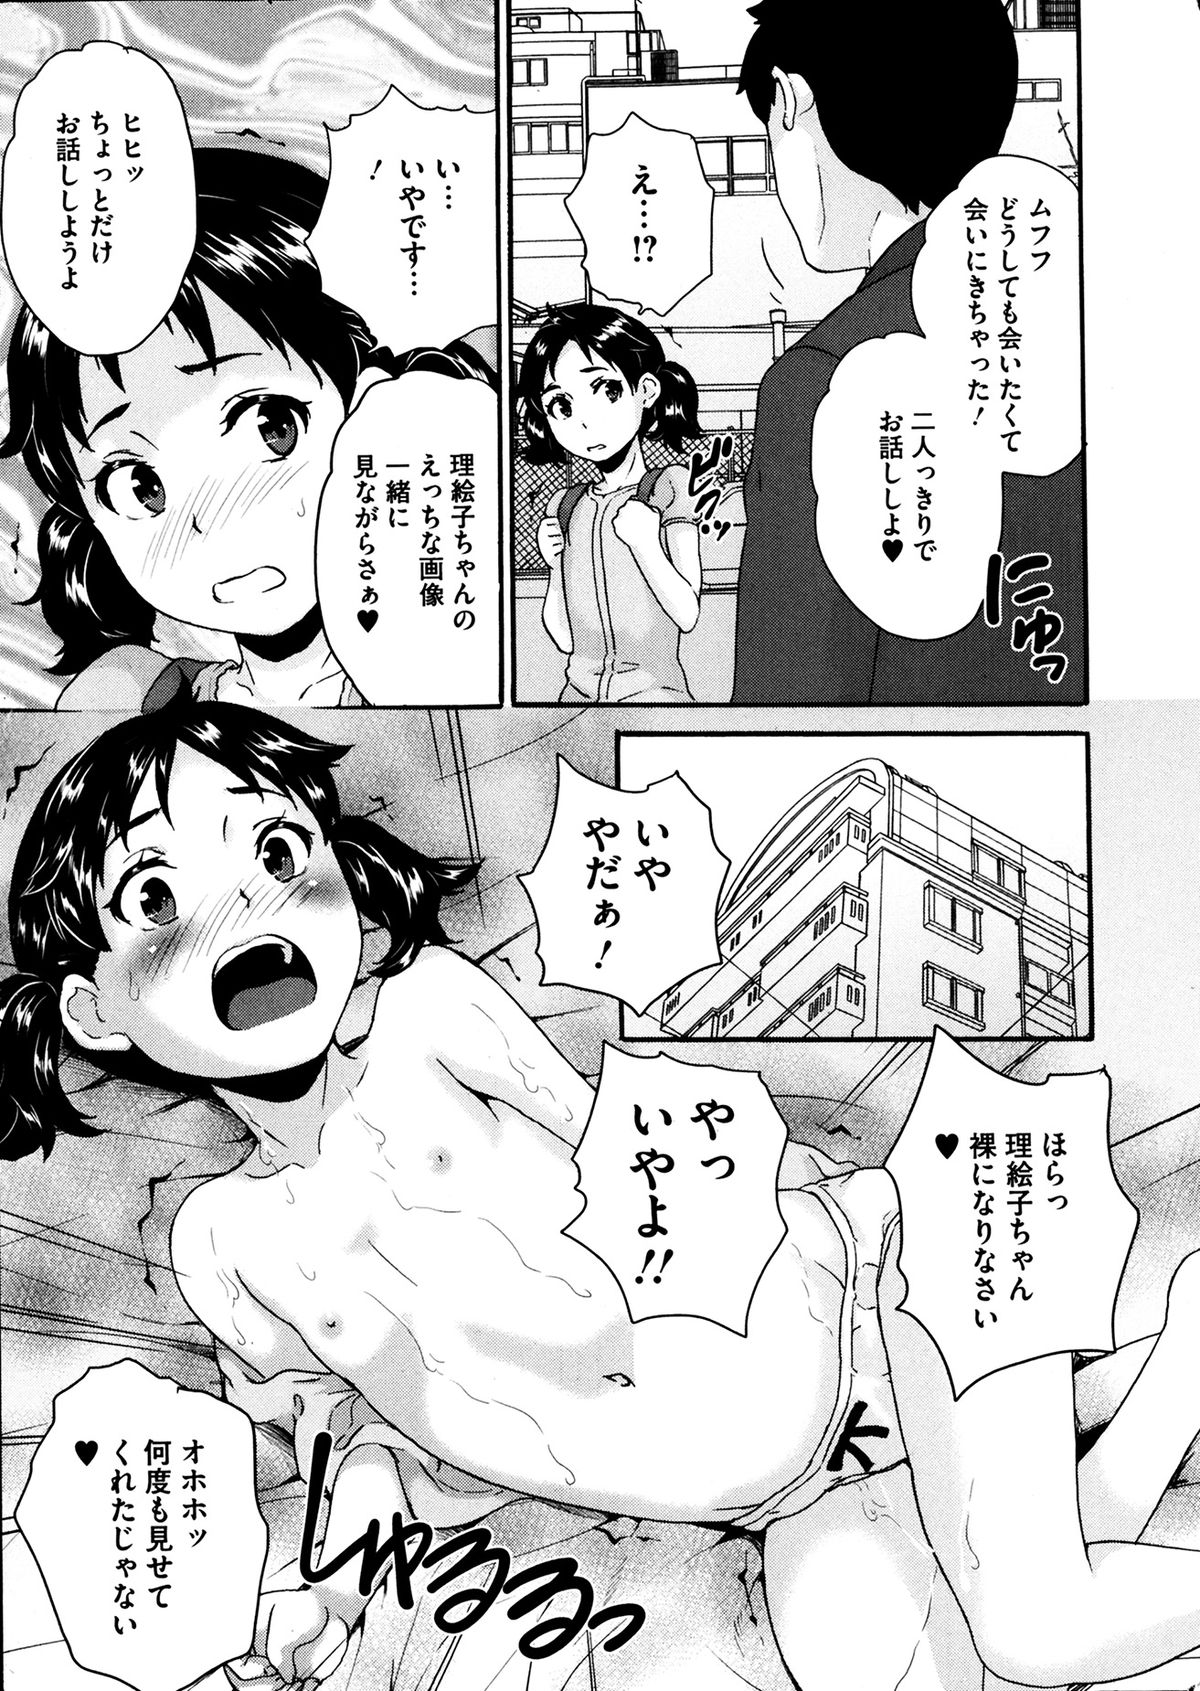 COMIC Mate 2014-04 page 17 full